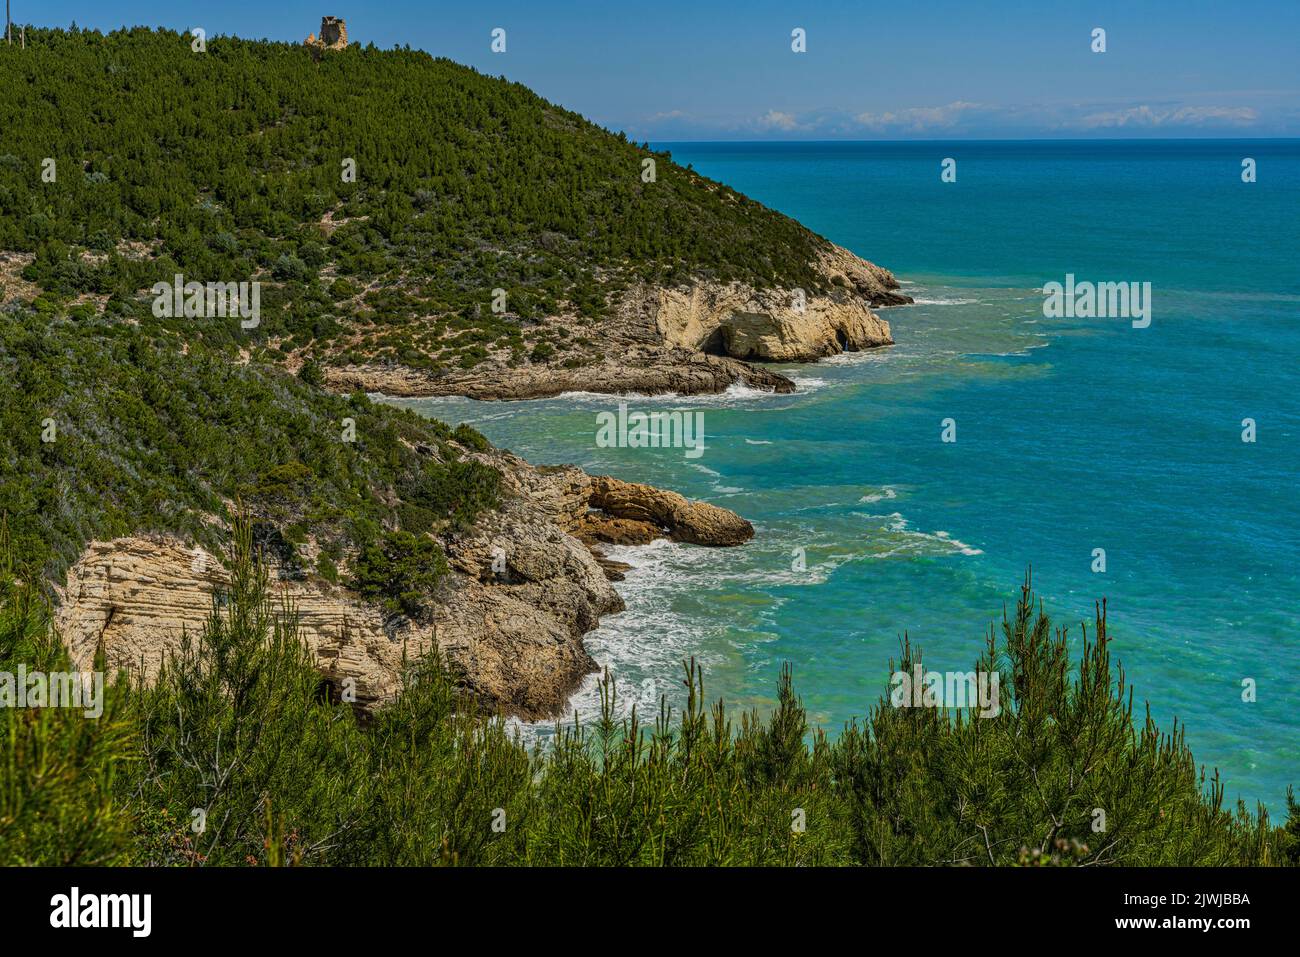 Cliffs and promontories of the Bay of San Felice in the Gargano. Cliffs overlooking the sea covered with Mediterranean vegetation. Vieste, Puglia Stock Photo